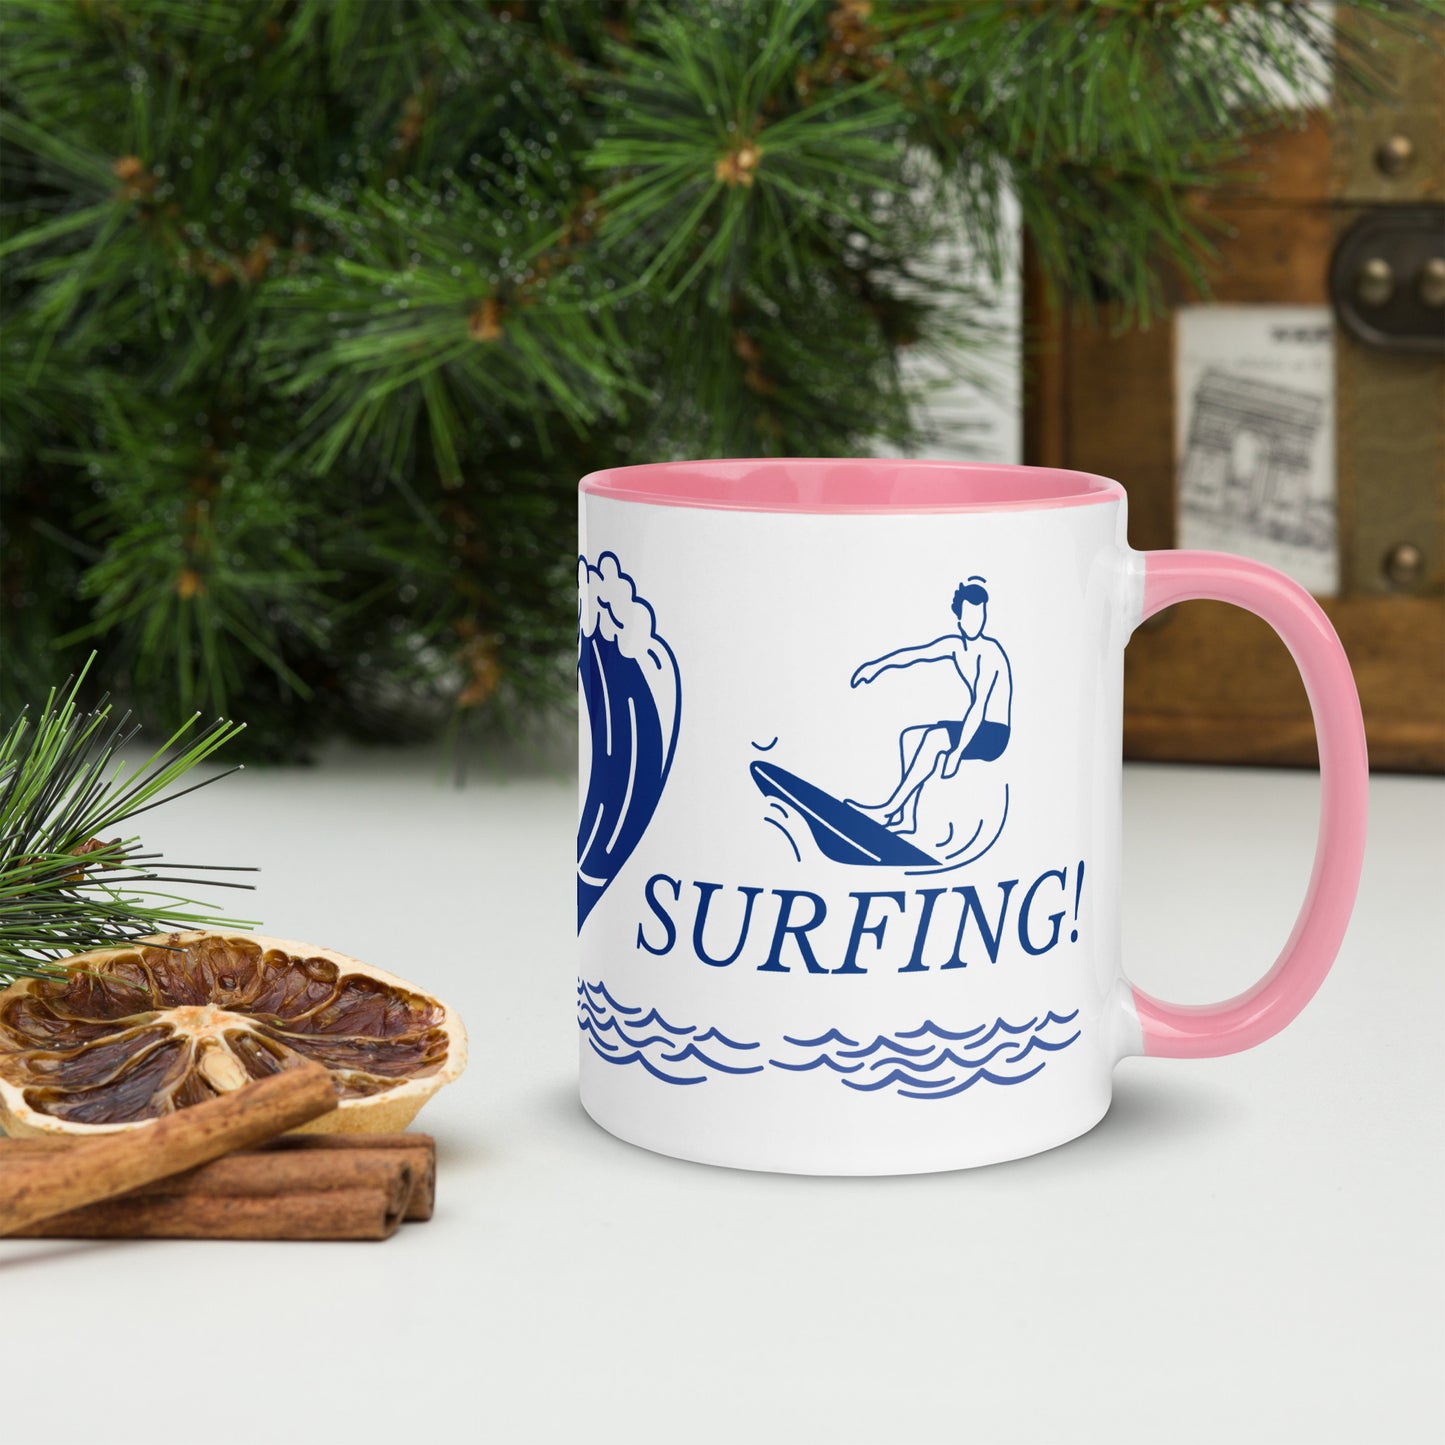 I Love Surfing Mug with Colour Inside by Our BoatyVerse